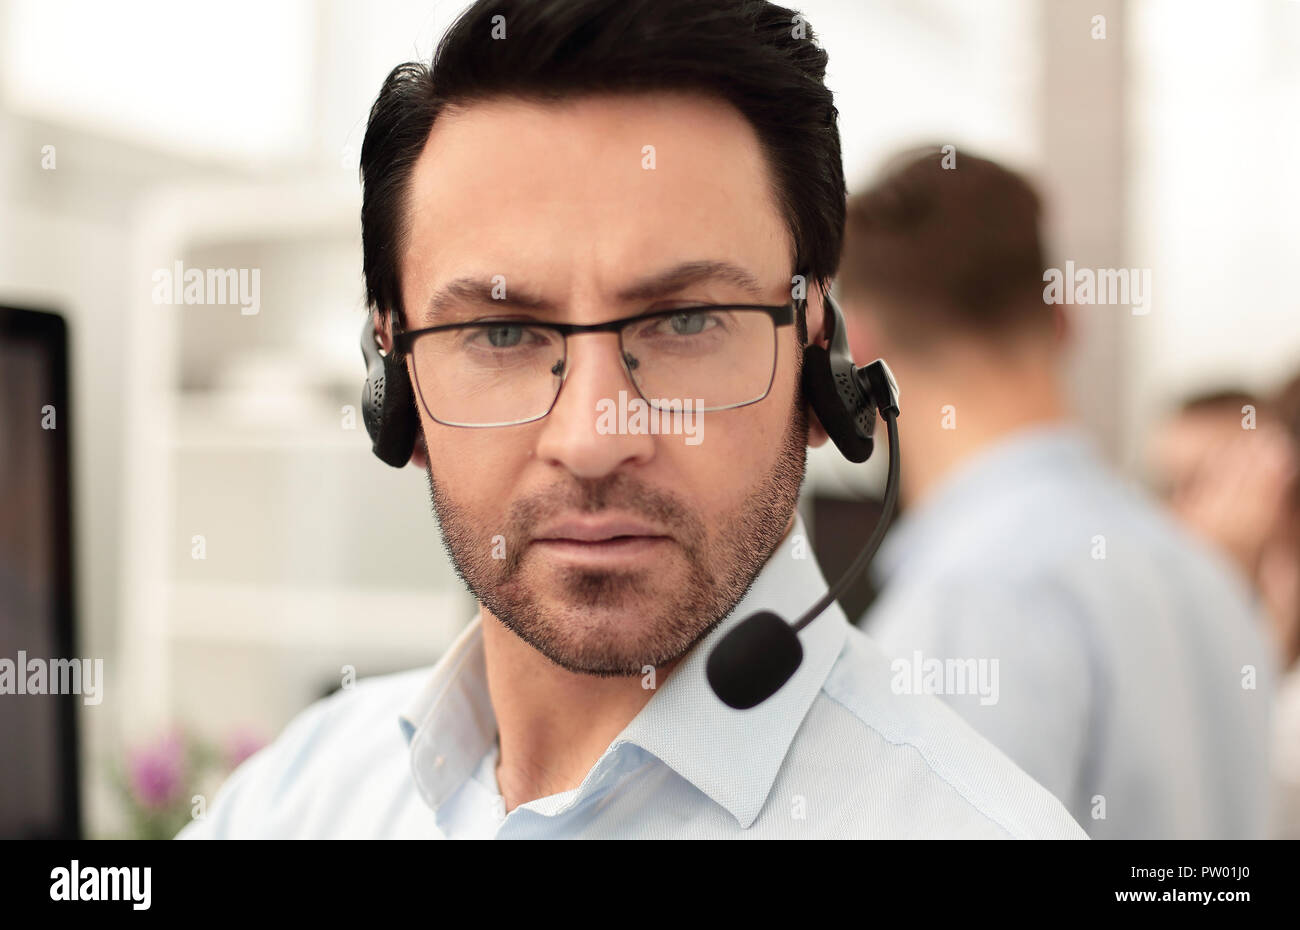 Group of business colleagues with headsets using computers at office desk Stock Photo